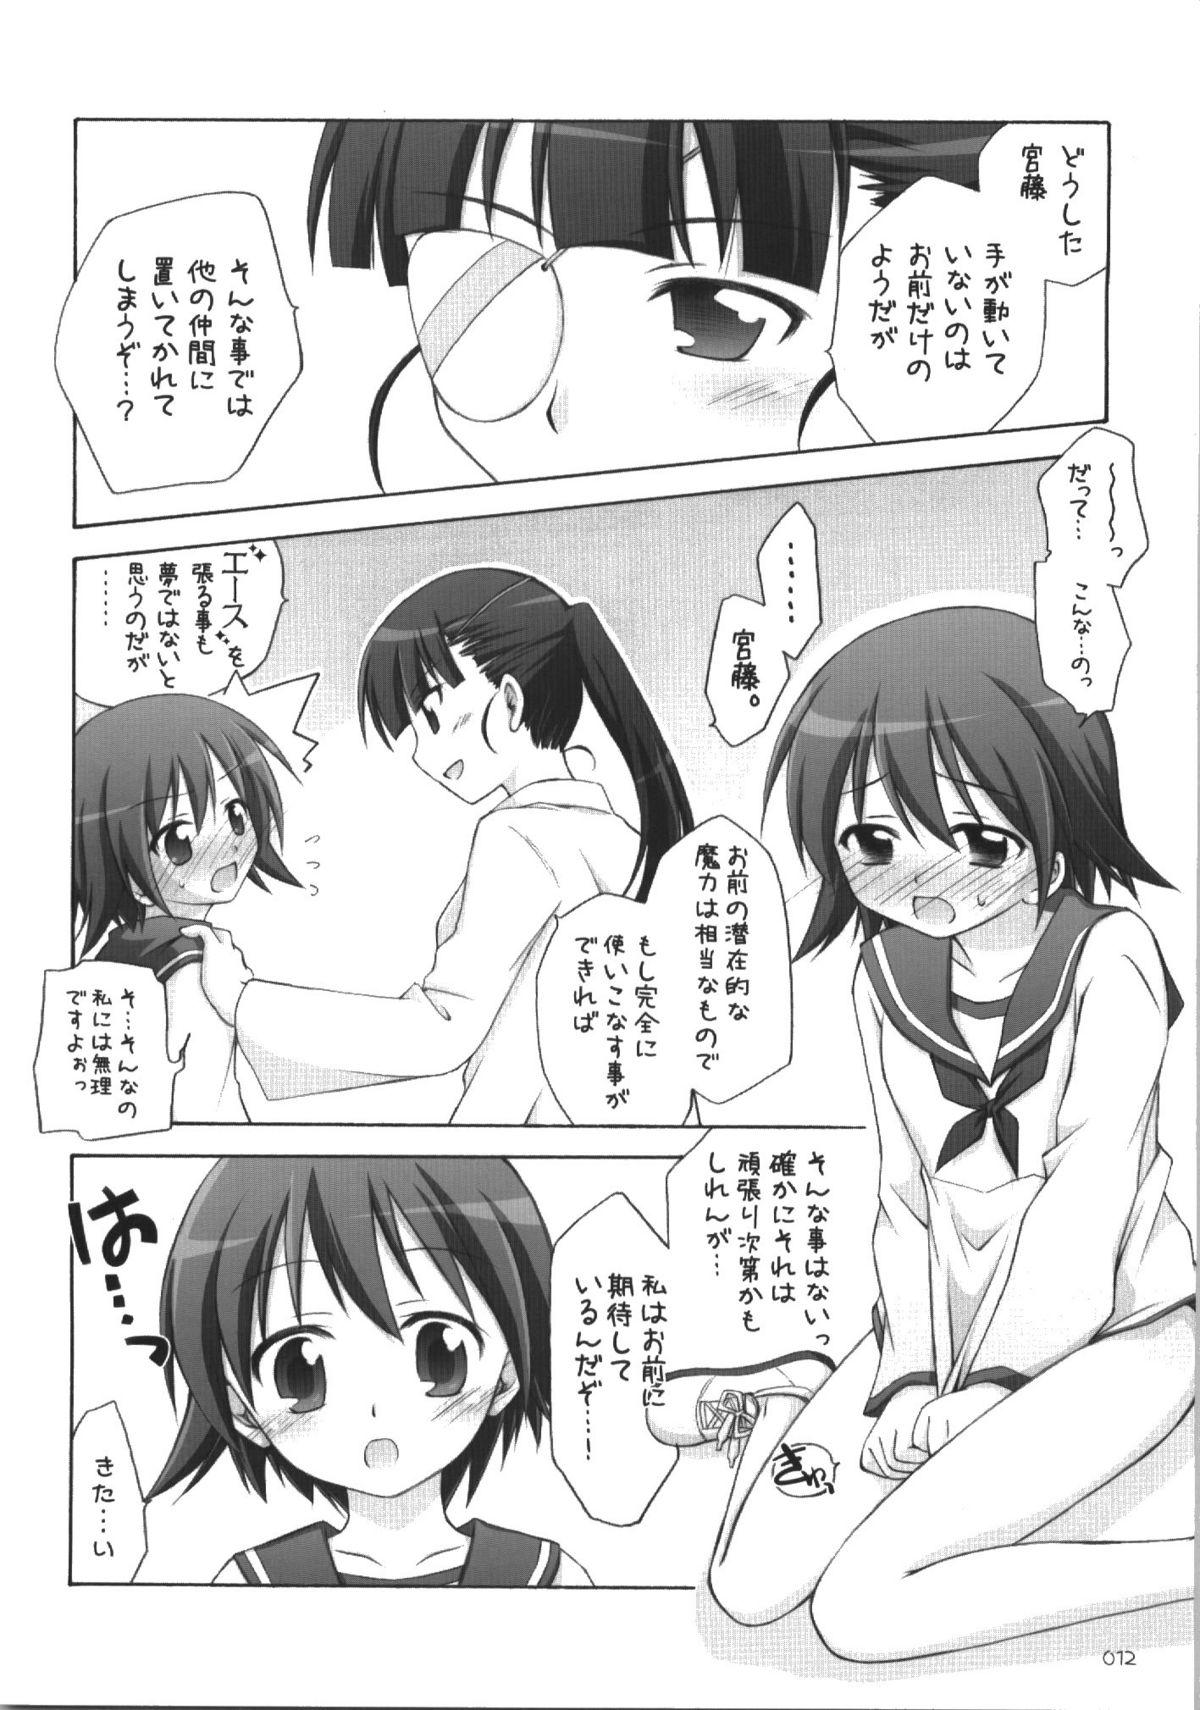 Big breasts s.n.e.g? - Strike witches Tiny Titties - Page 12